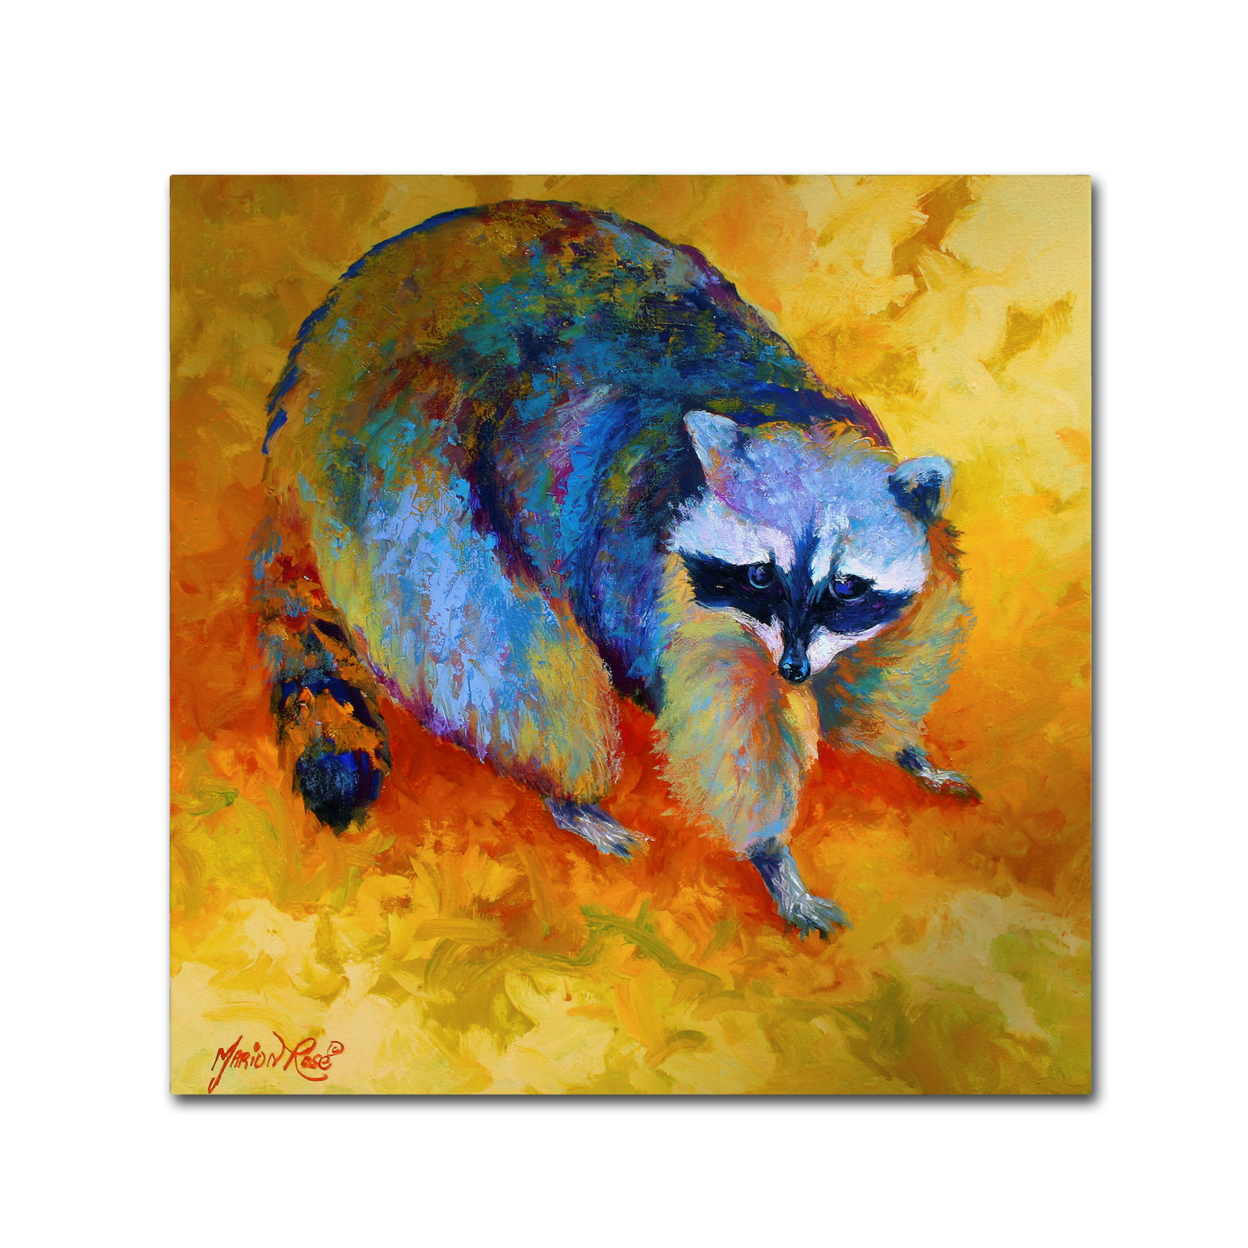 Marion Rose 'Coon' Ready To Hang Canvas Art 18 X 18 Inches Made In USA